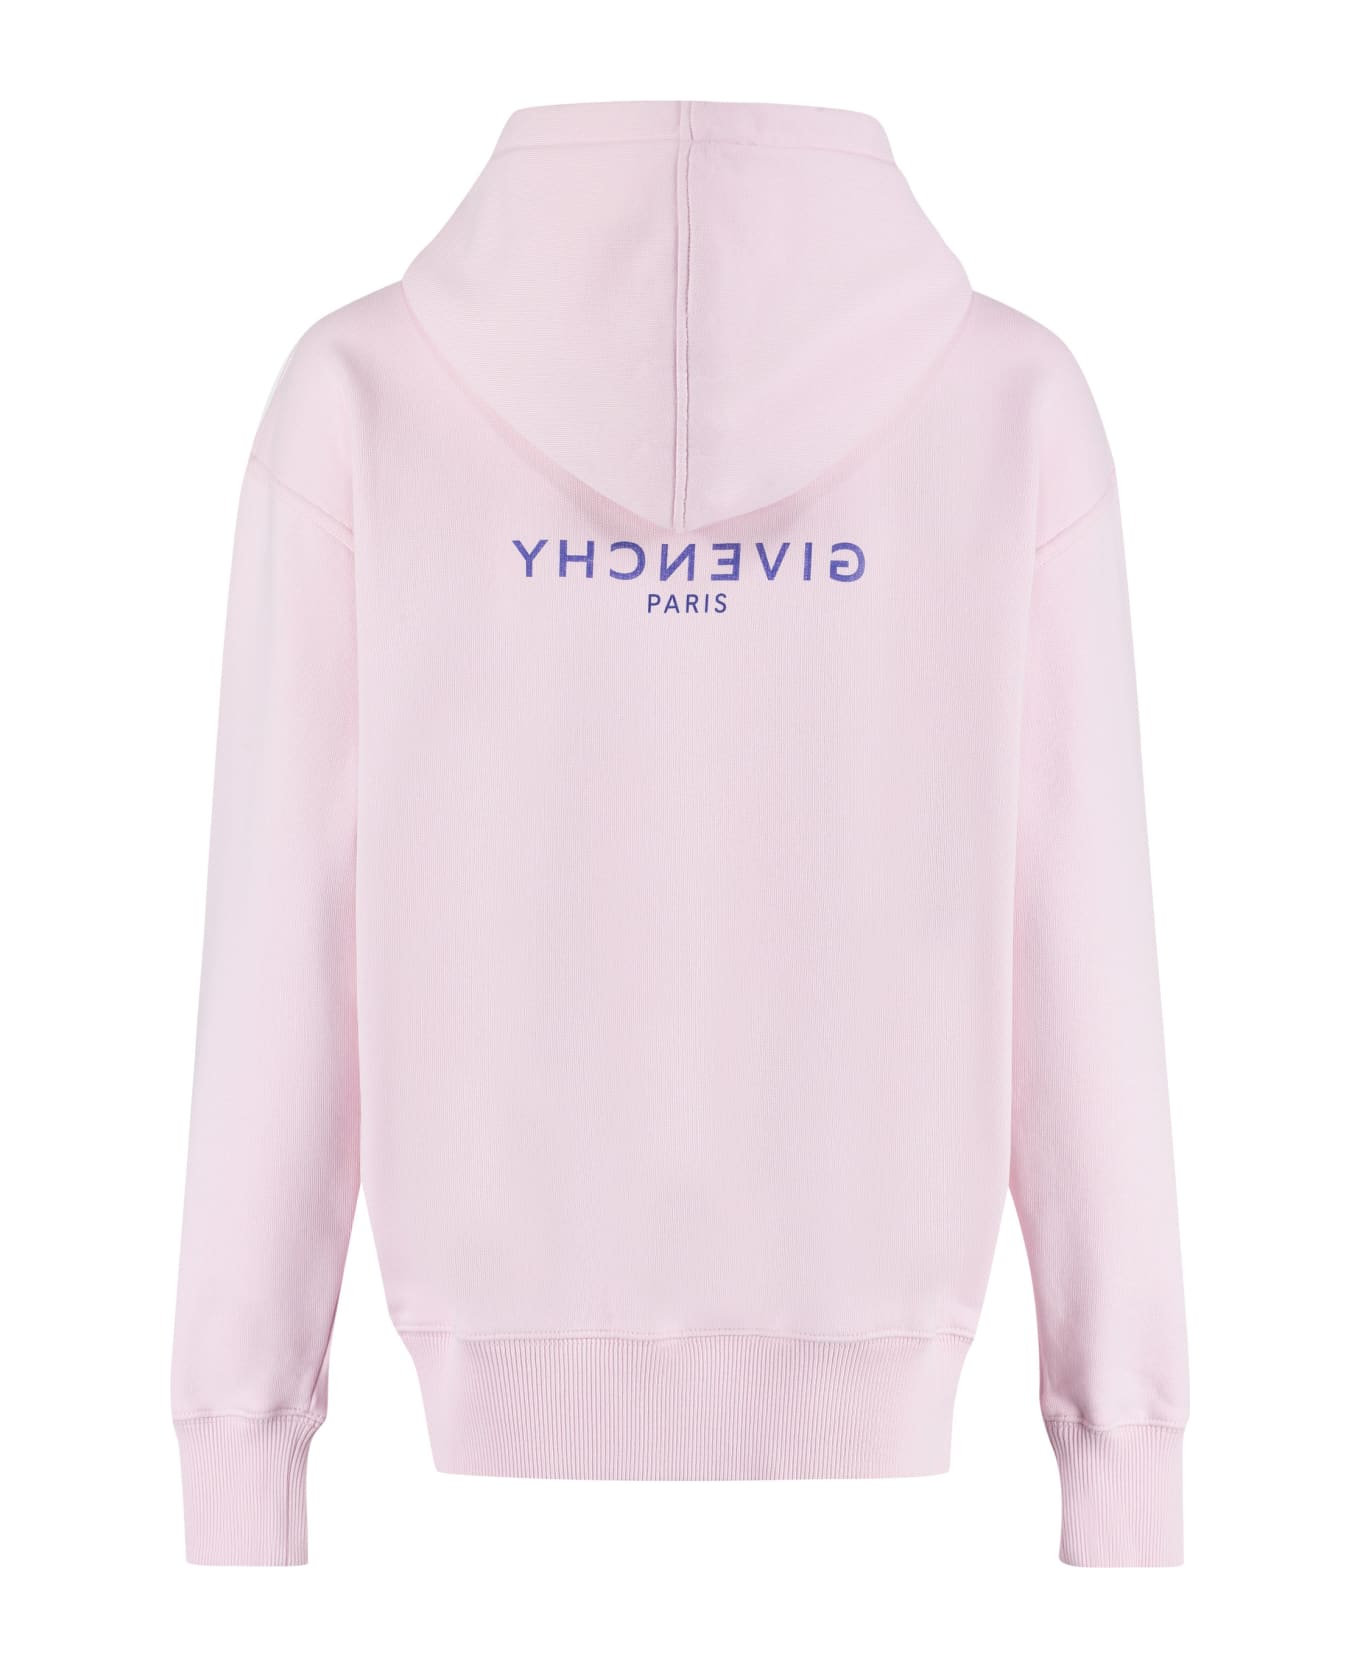 Givenchy Cotton Hoodie - Pink